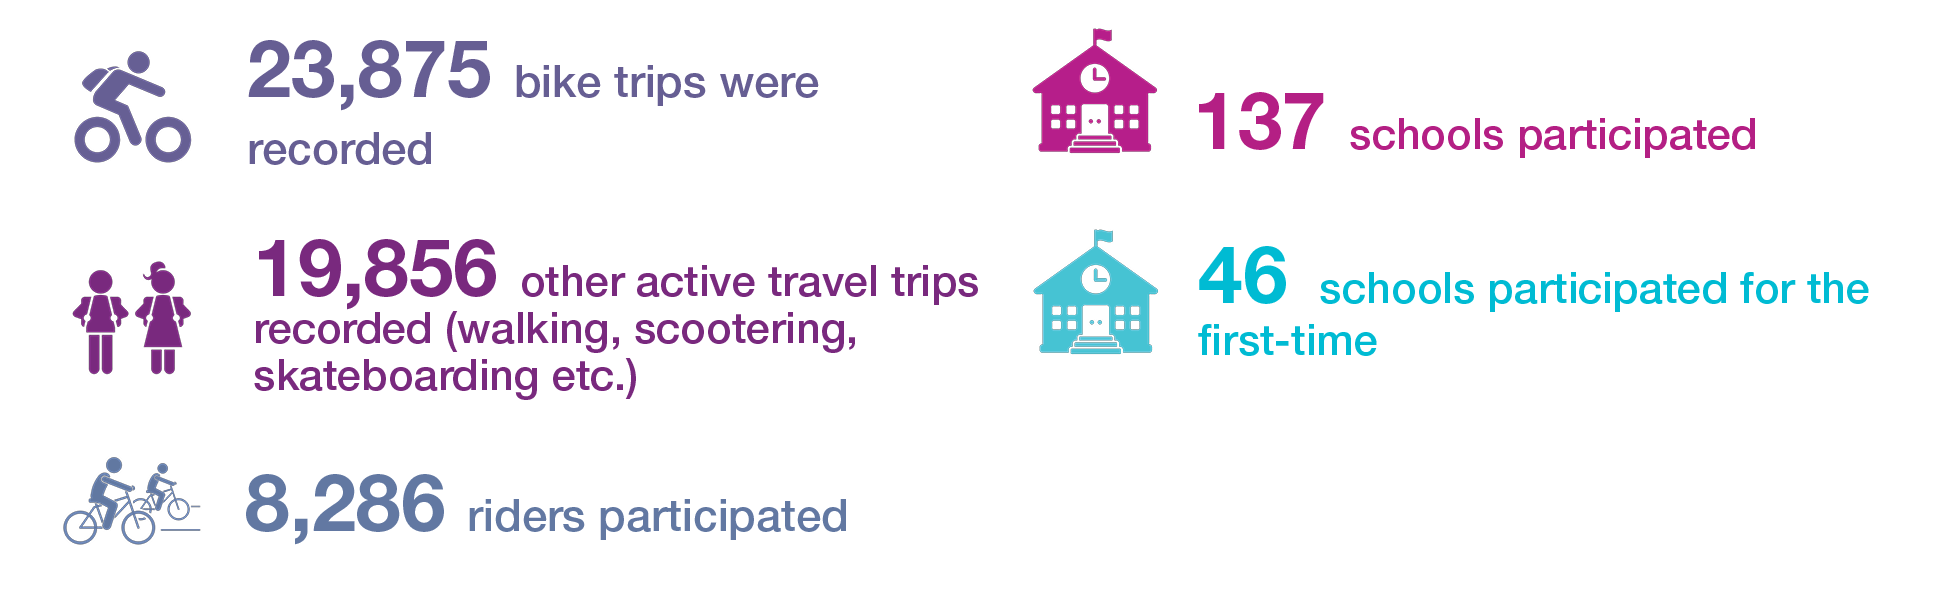 23,875 bike trips were recorded. 19,856 other active travel trips recorded (walking, scootering, skateboarding, etc.), 8,286 riders participated, 137 schools participated, and 46 schools participated for the first time.